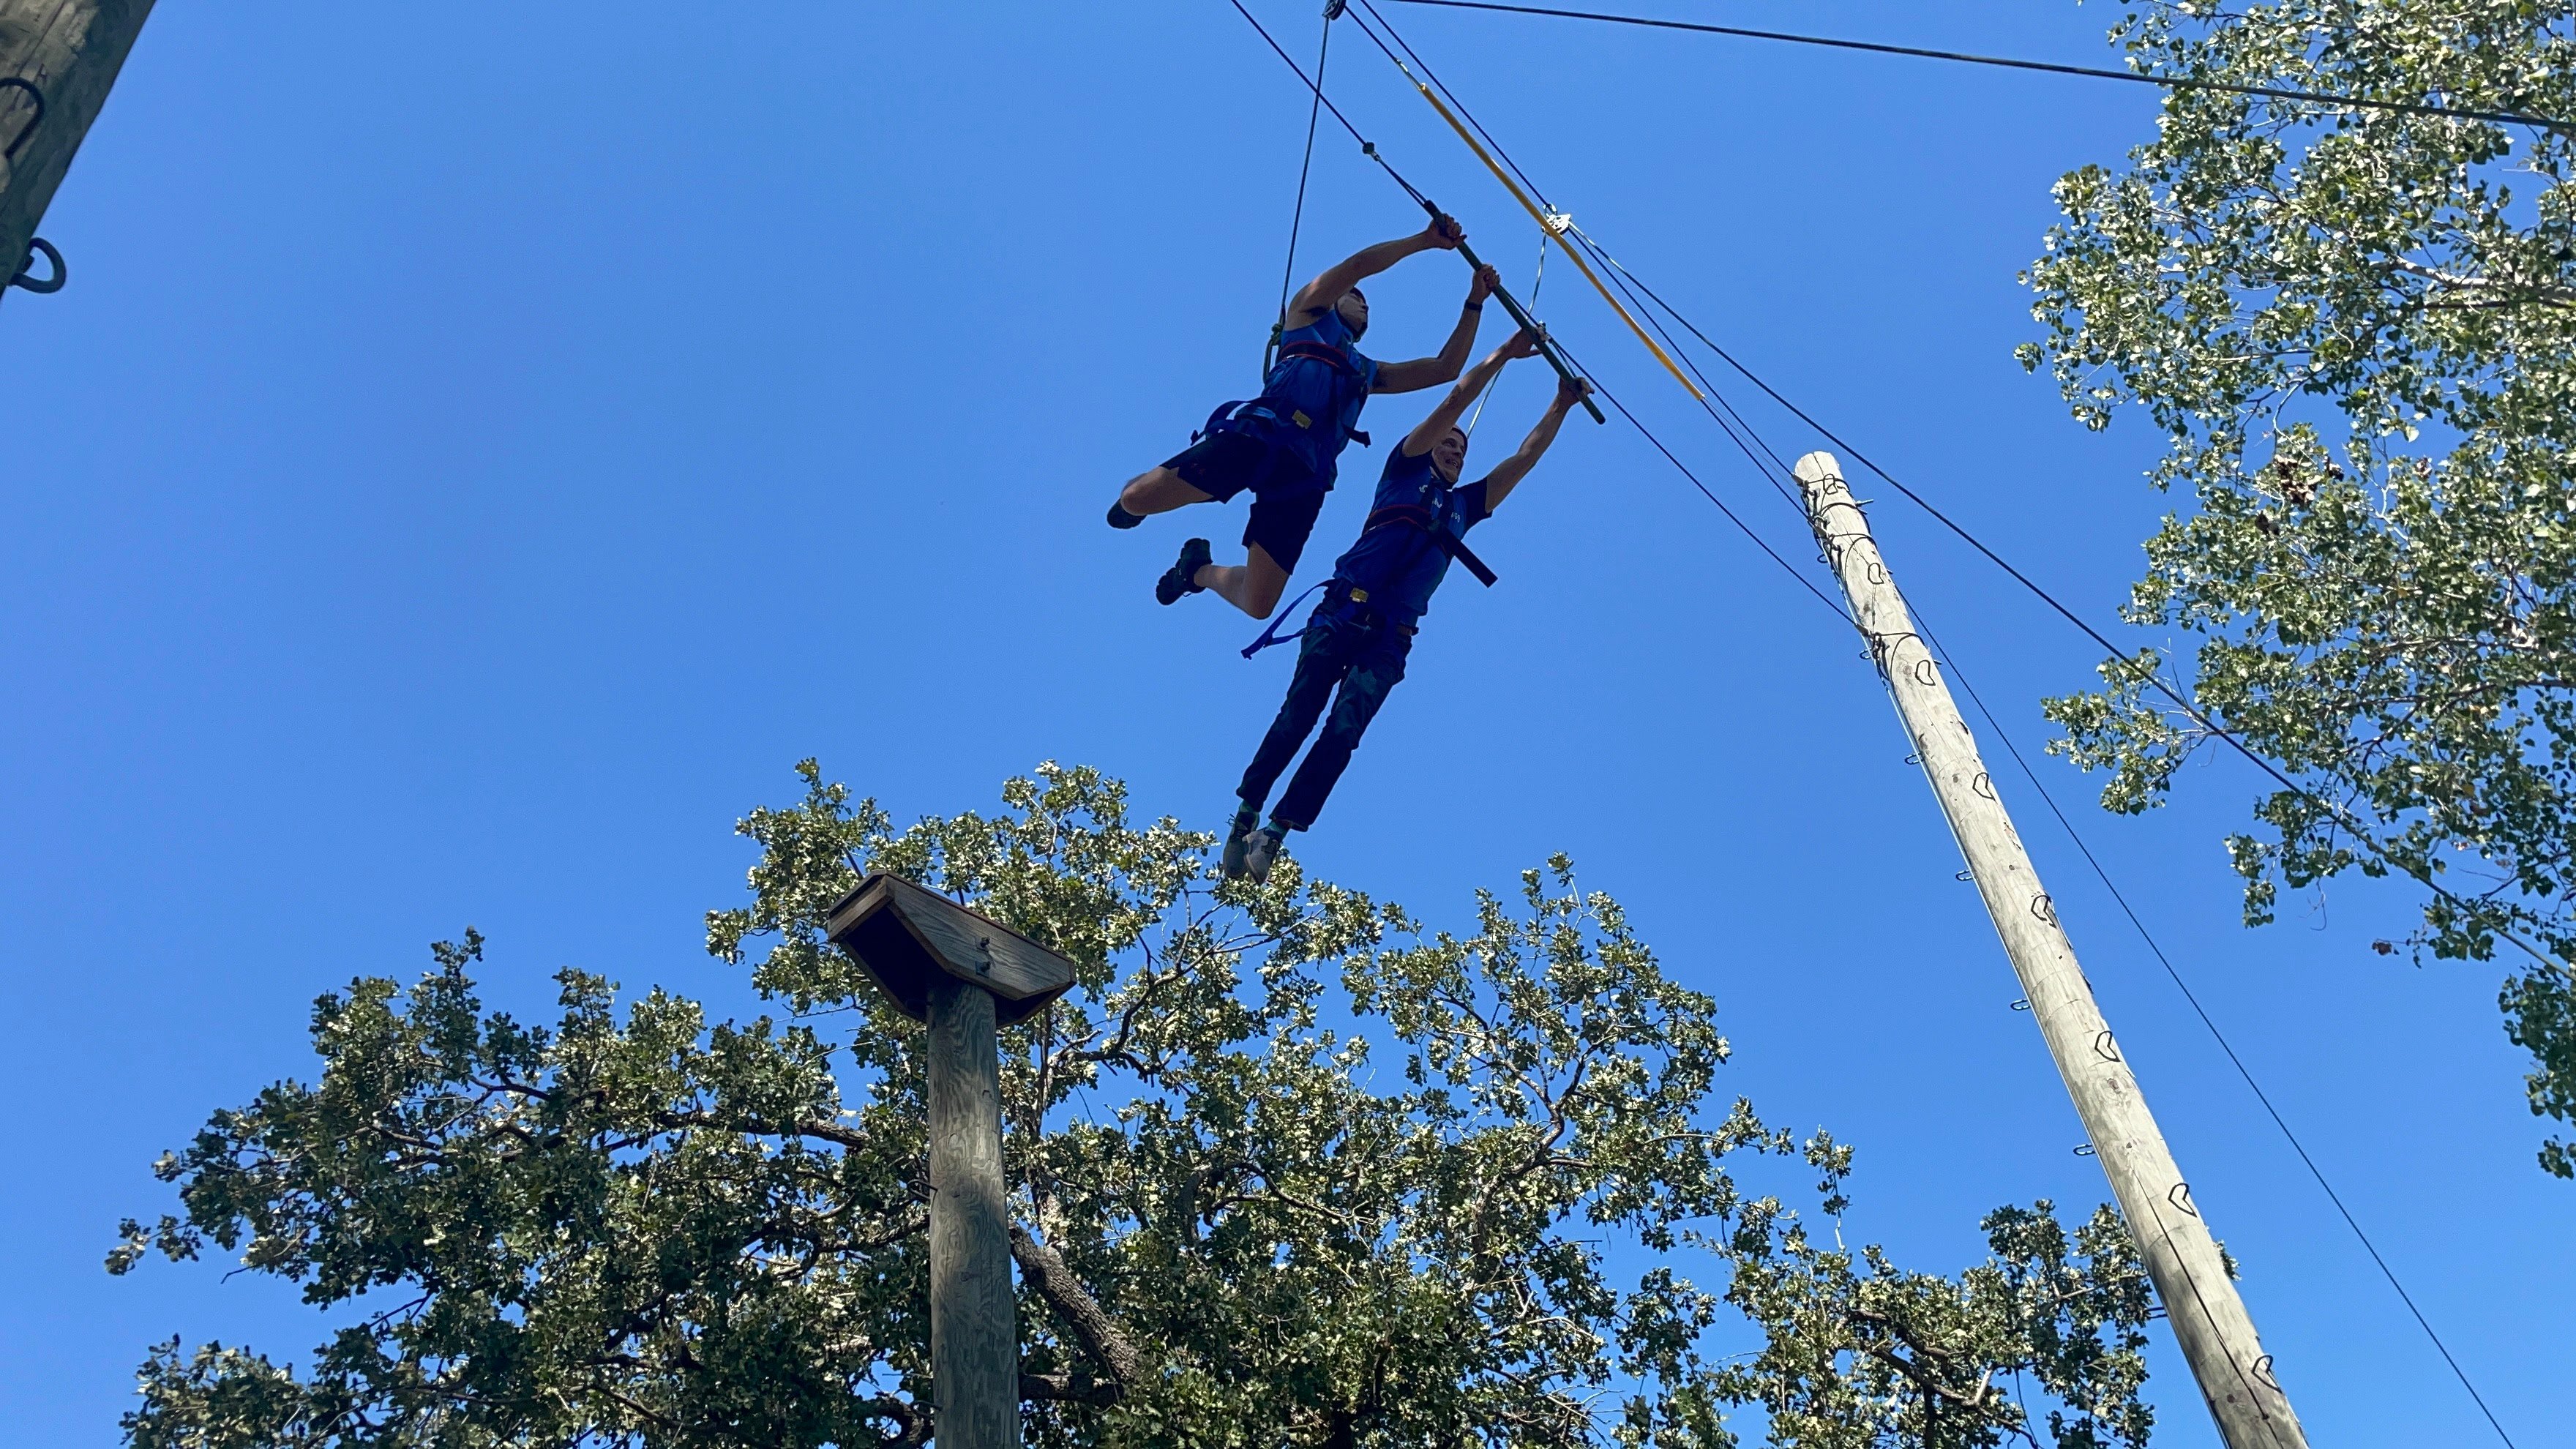 Co-founders, George and James, at the Baylor University Challenge Course jumping from a telephone pole and hanging onto a trapeze bar